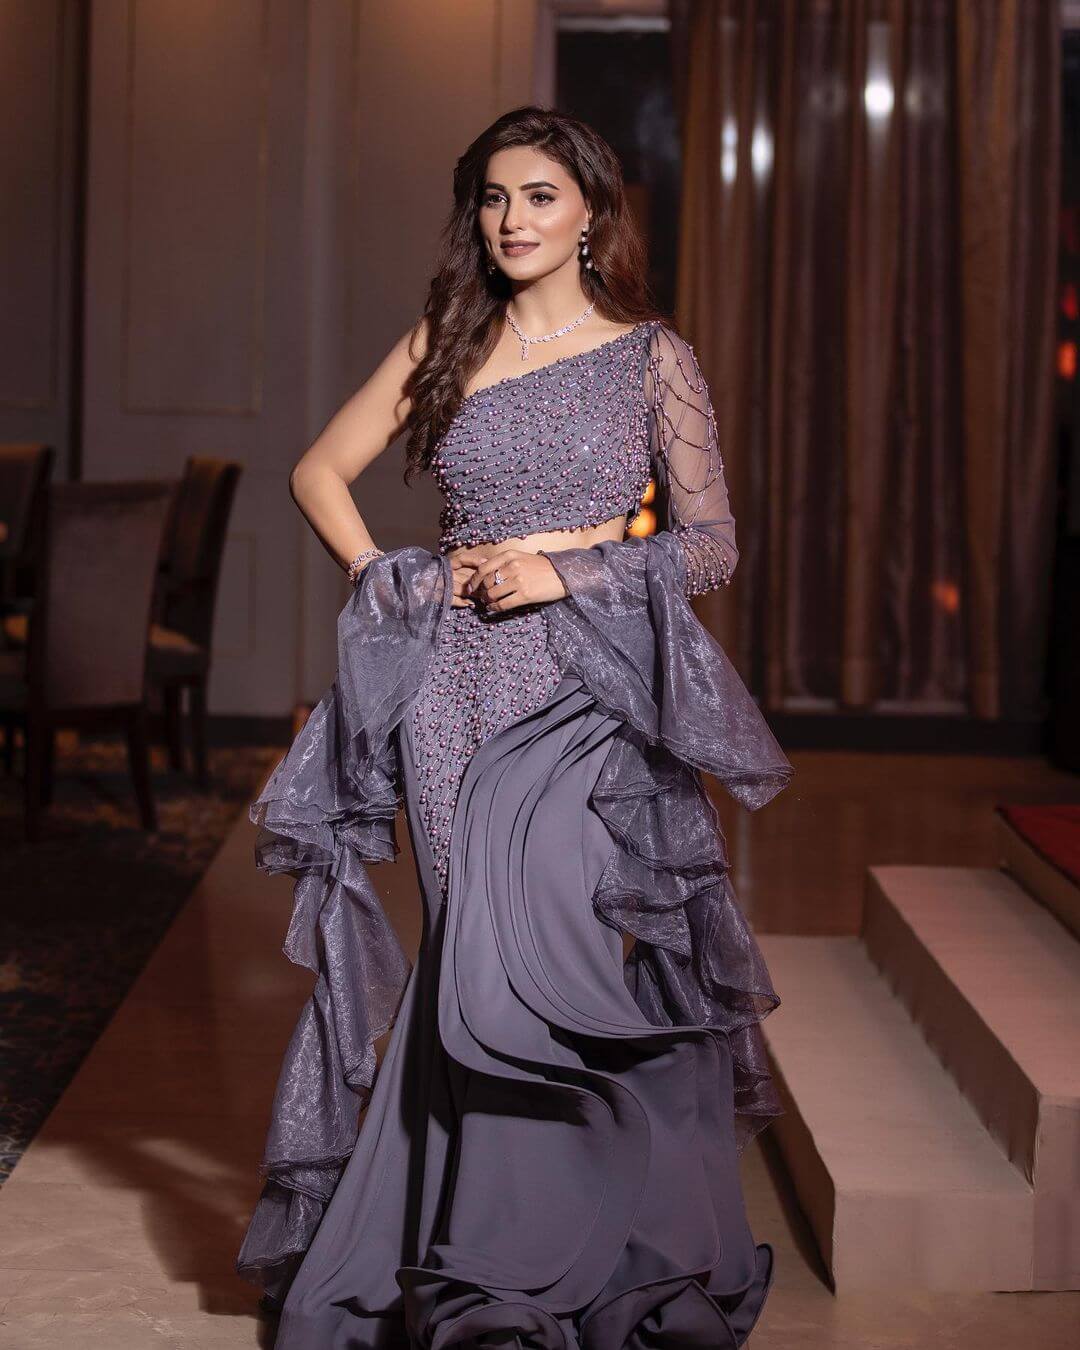 Ginni Kapoor Ginni Kapoor Classy Outfit And LooksDazzling In Grey Evening Gown Outfit